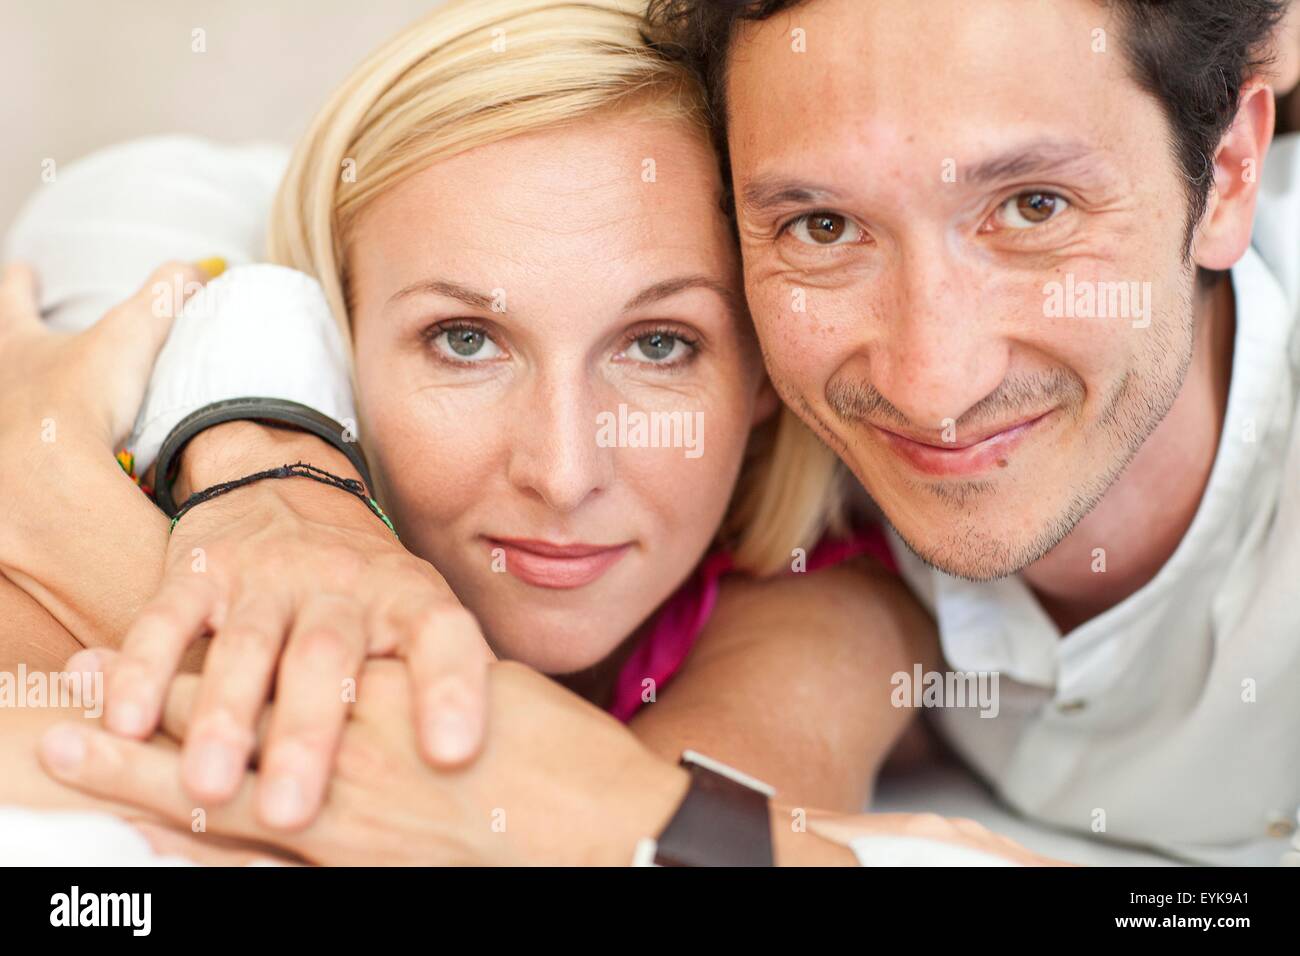 Portrait of mid adult couple, lying on bed, close-up Banque D'Images